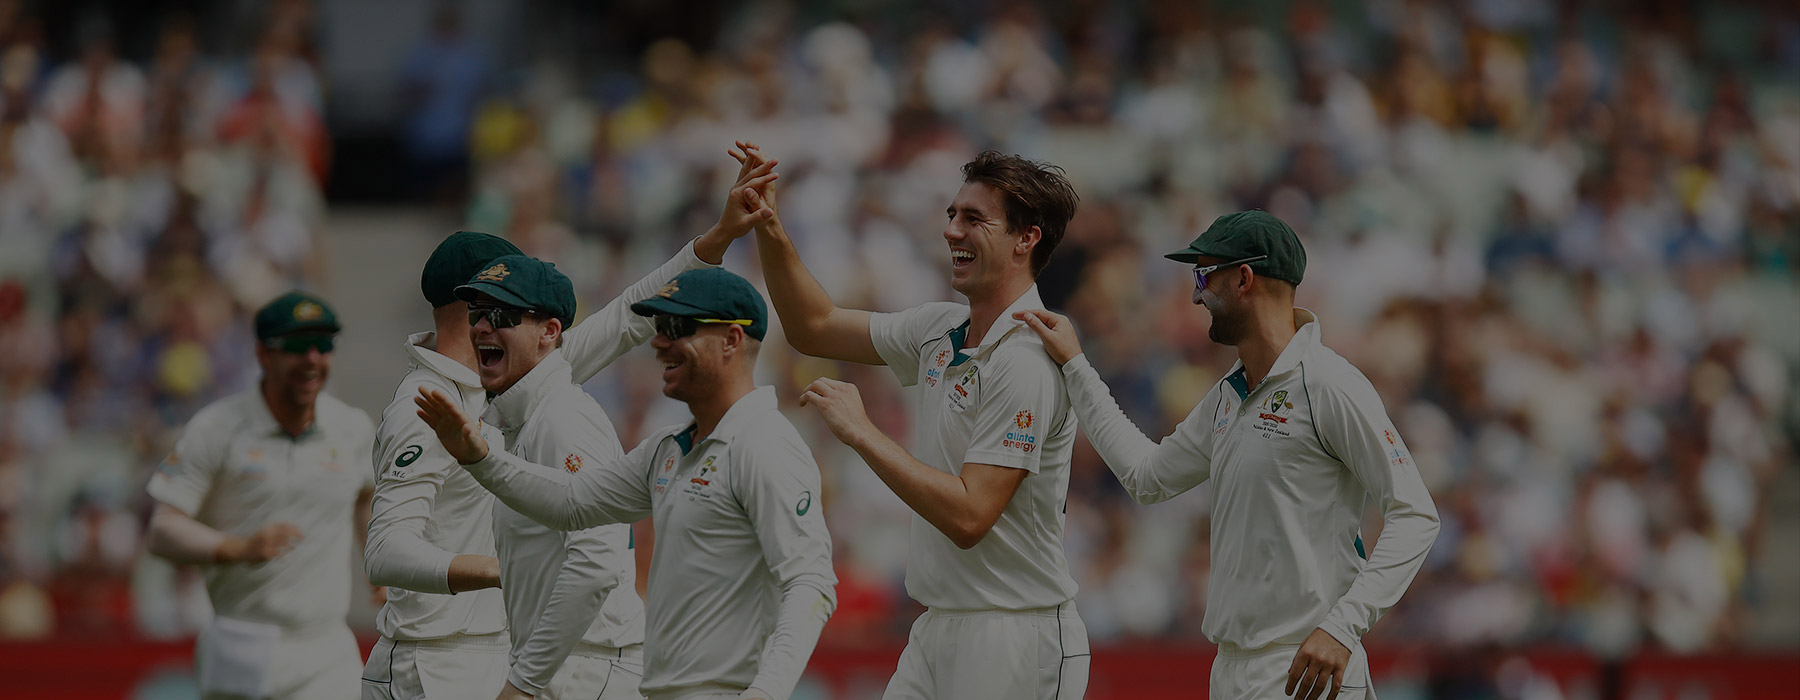 2019 Boxing Day Test